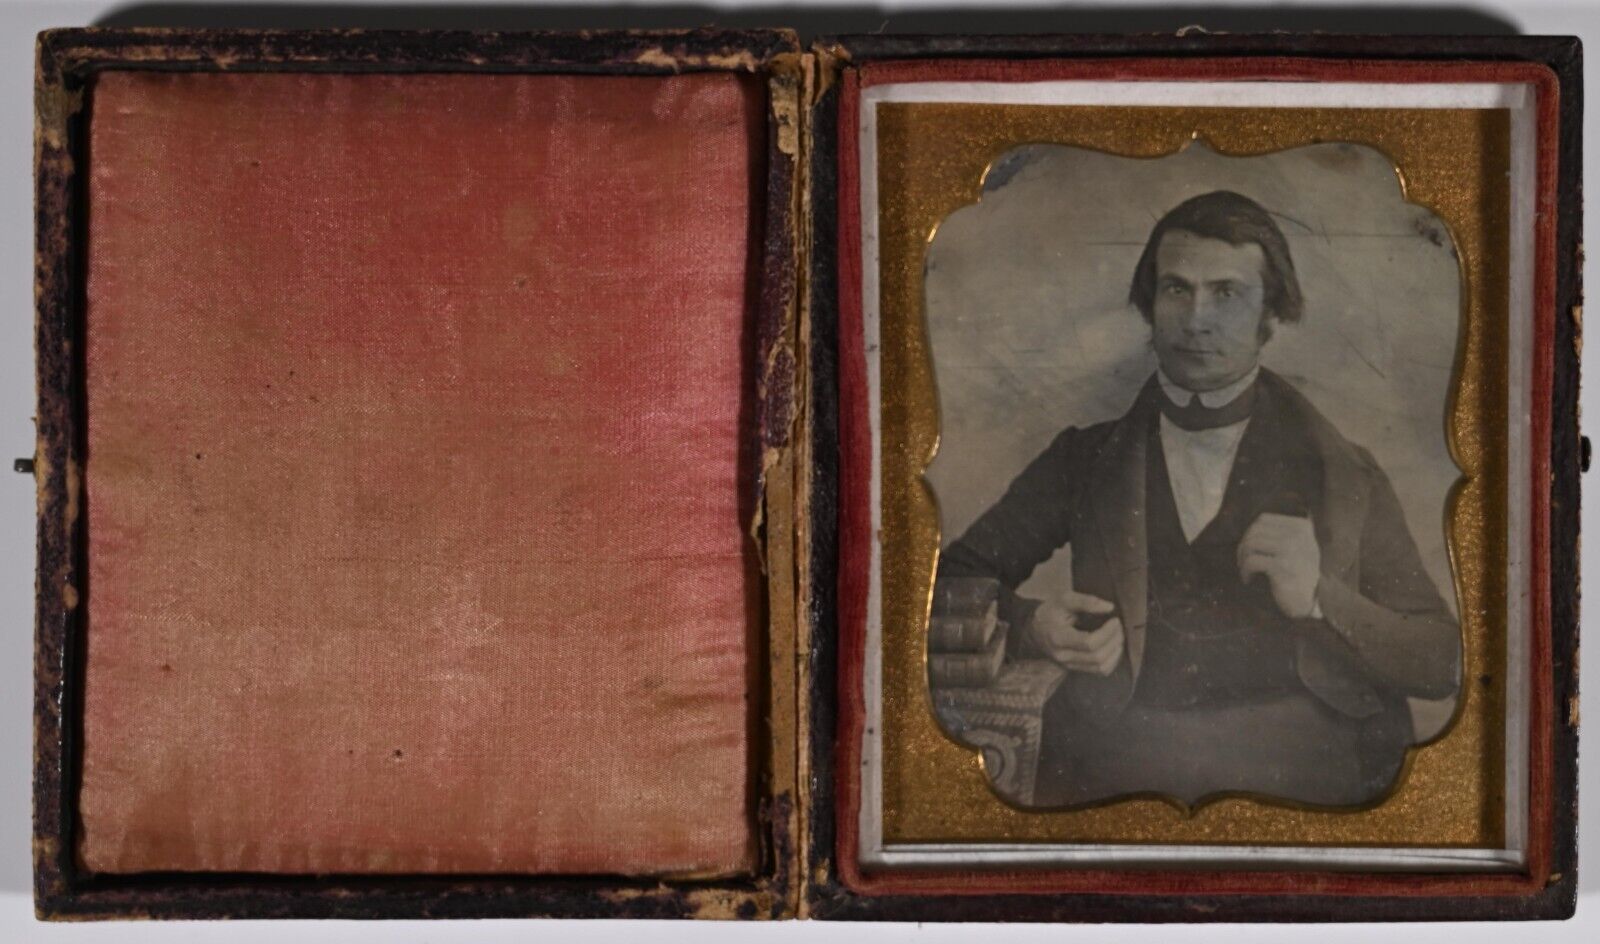 1/6TH PLATE CASED PLUMBEDAGUERREOTYPE CIRCA 1850s HANDSOME YOUNG MAN NEW YORK NY